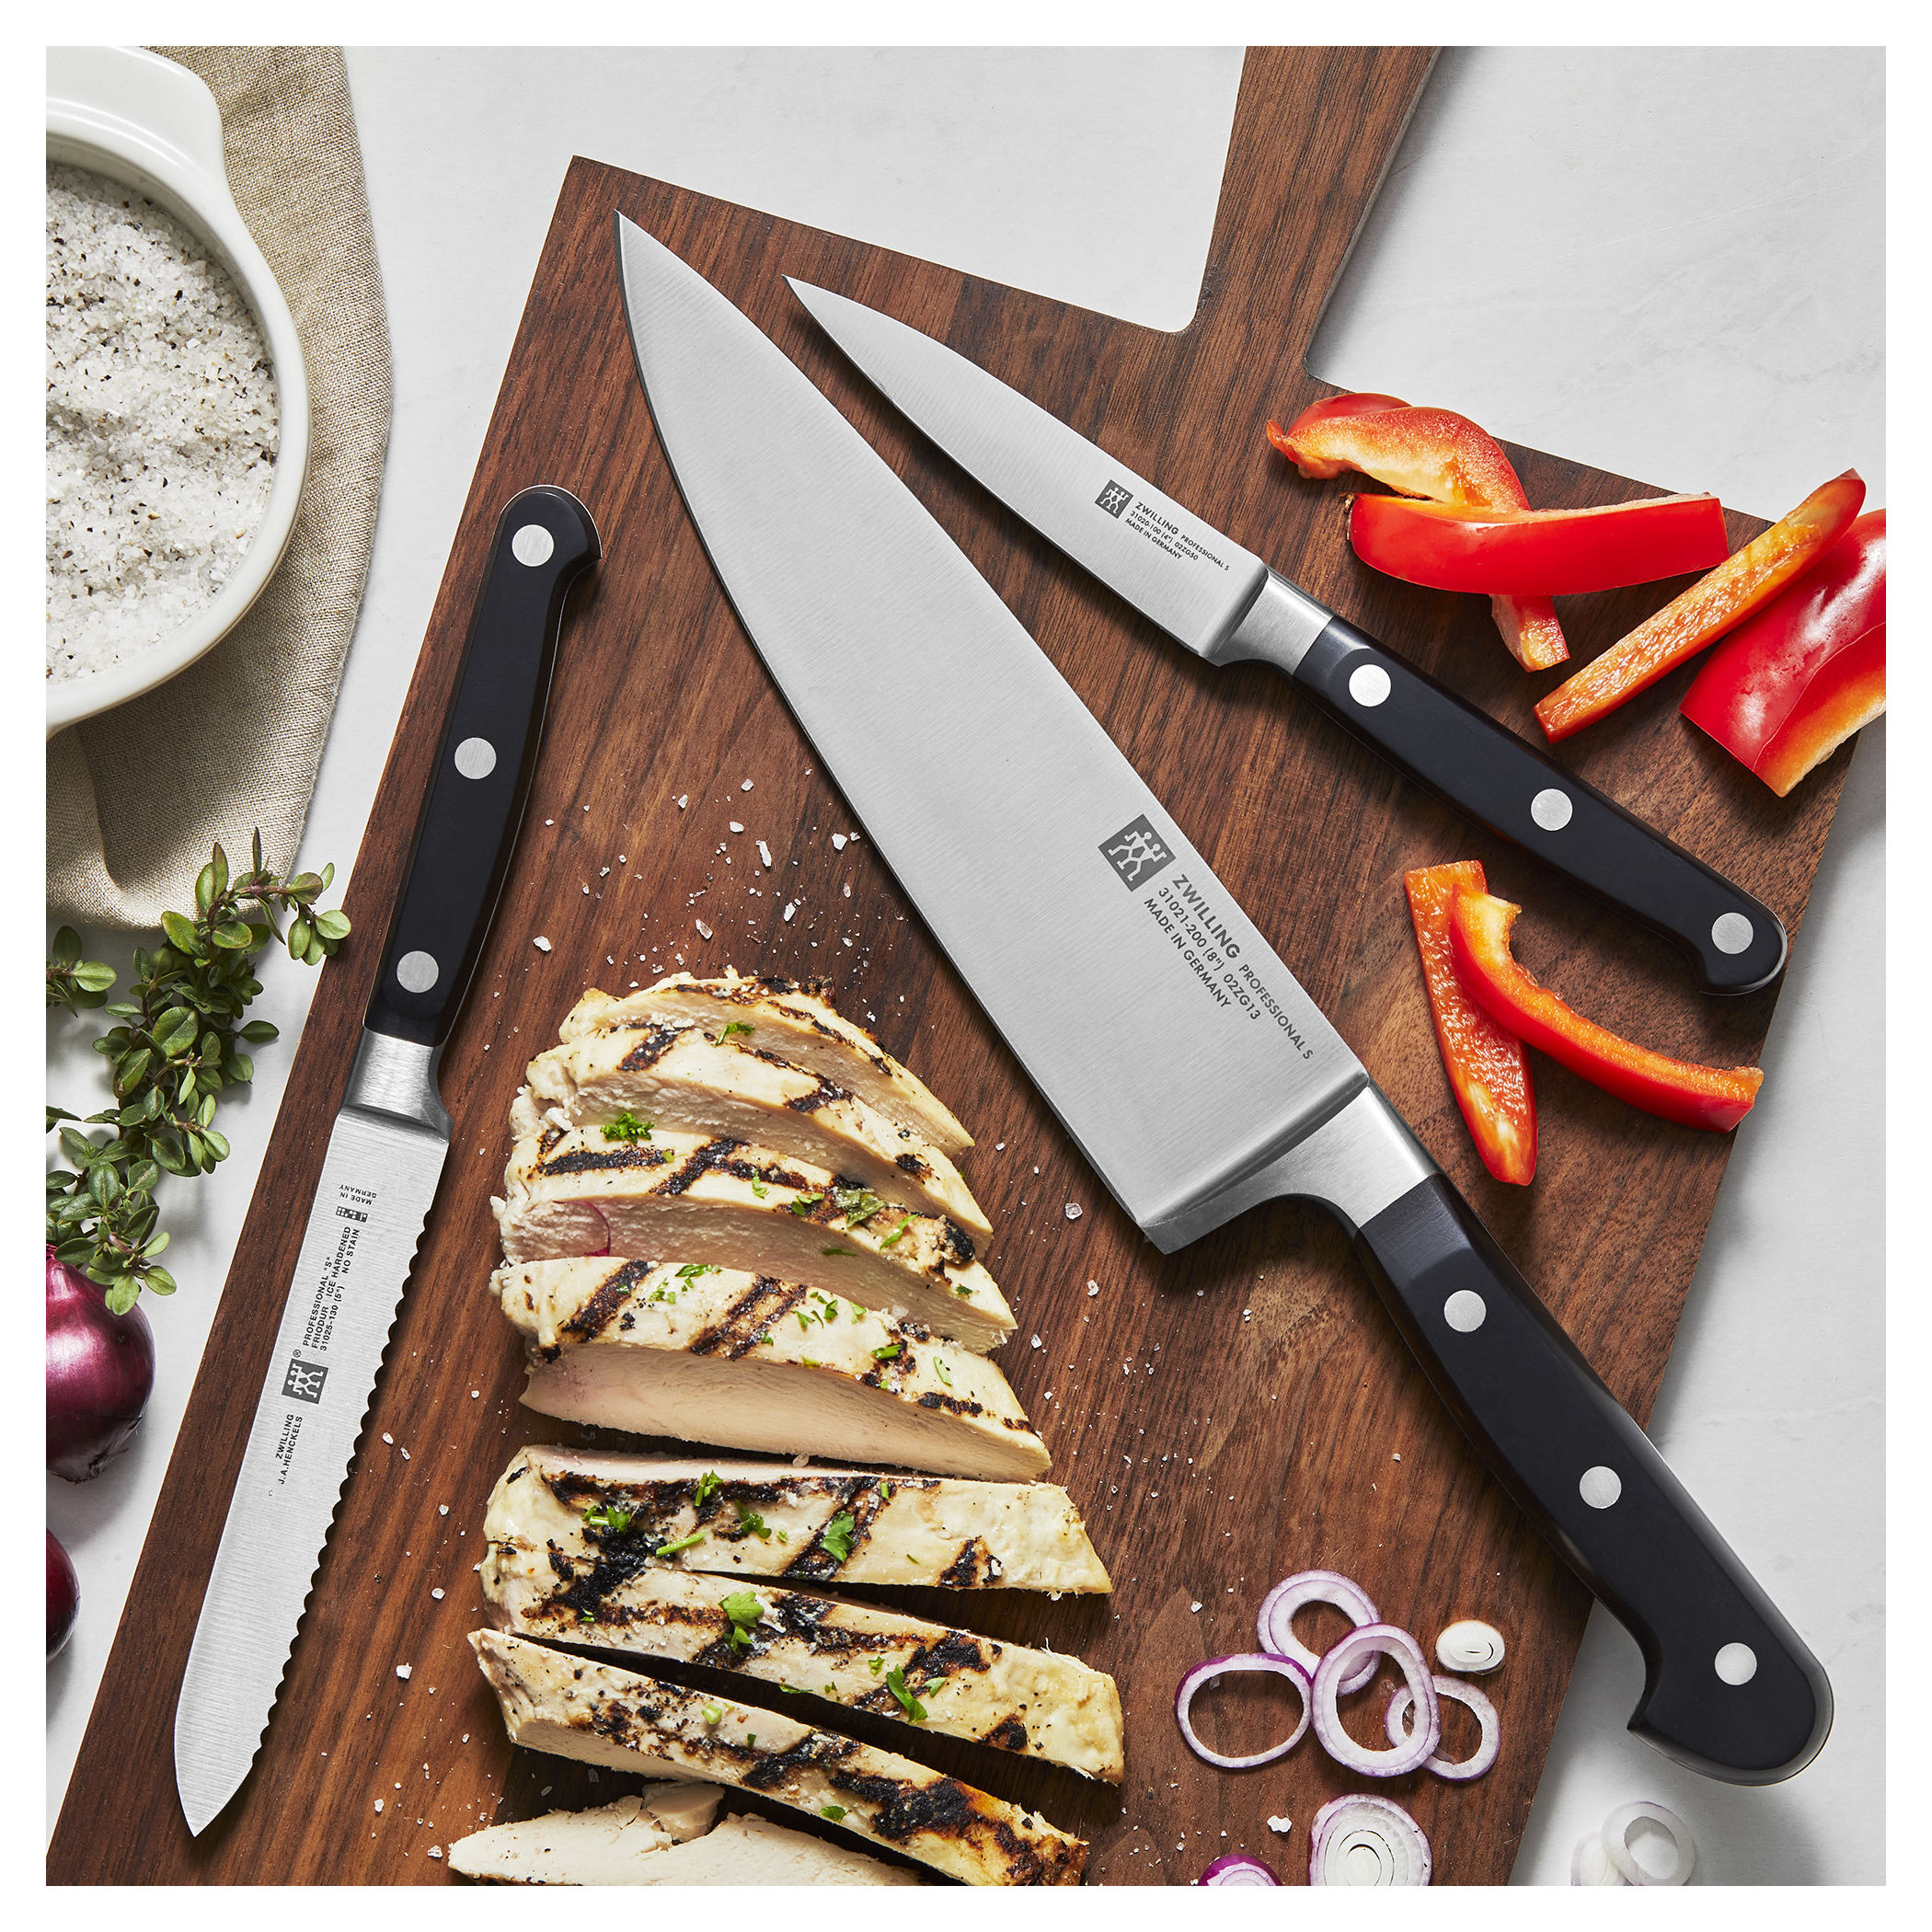 Zwilling 8 Inch Professional S Chef knife Review